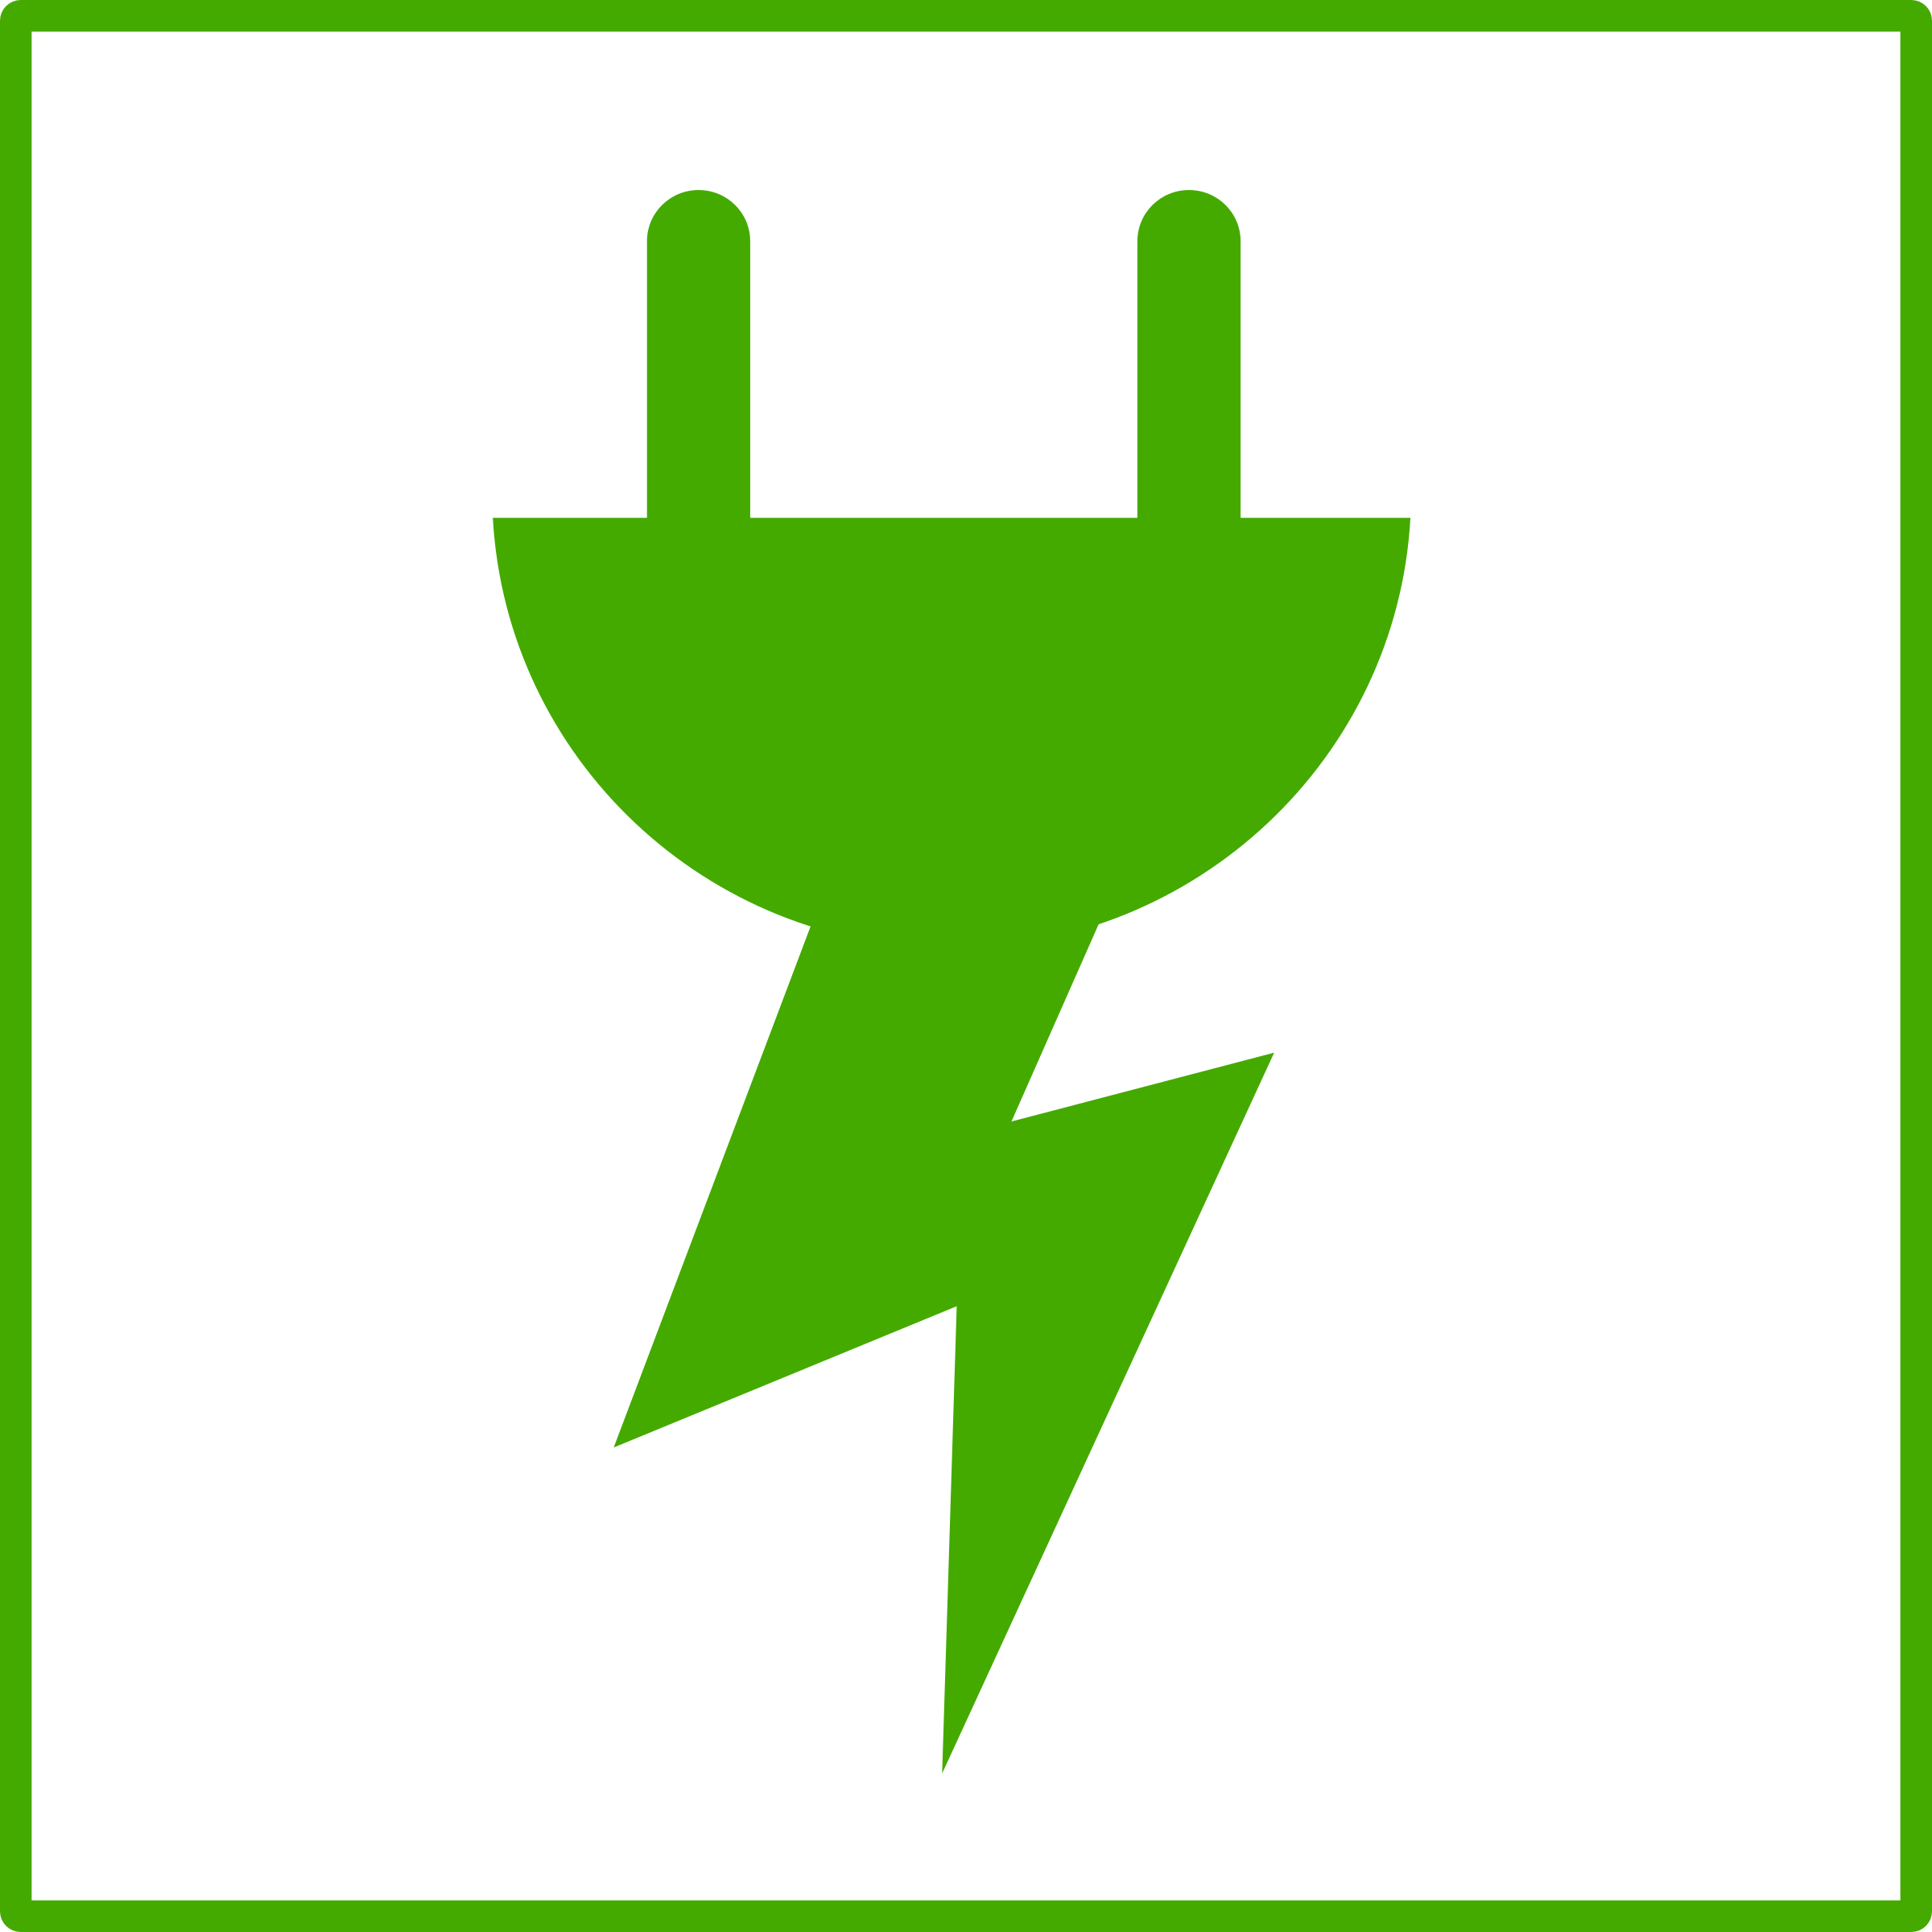 Green Energy Picture HD Image Free PNG PNG Image